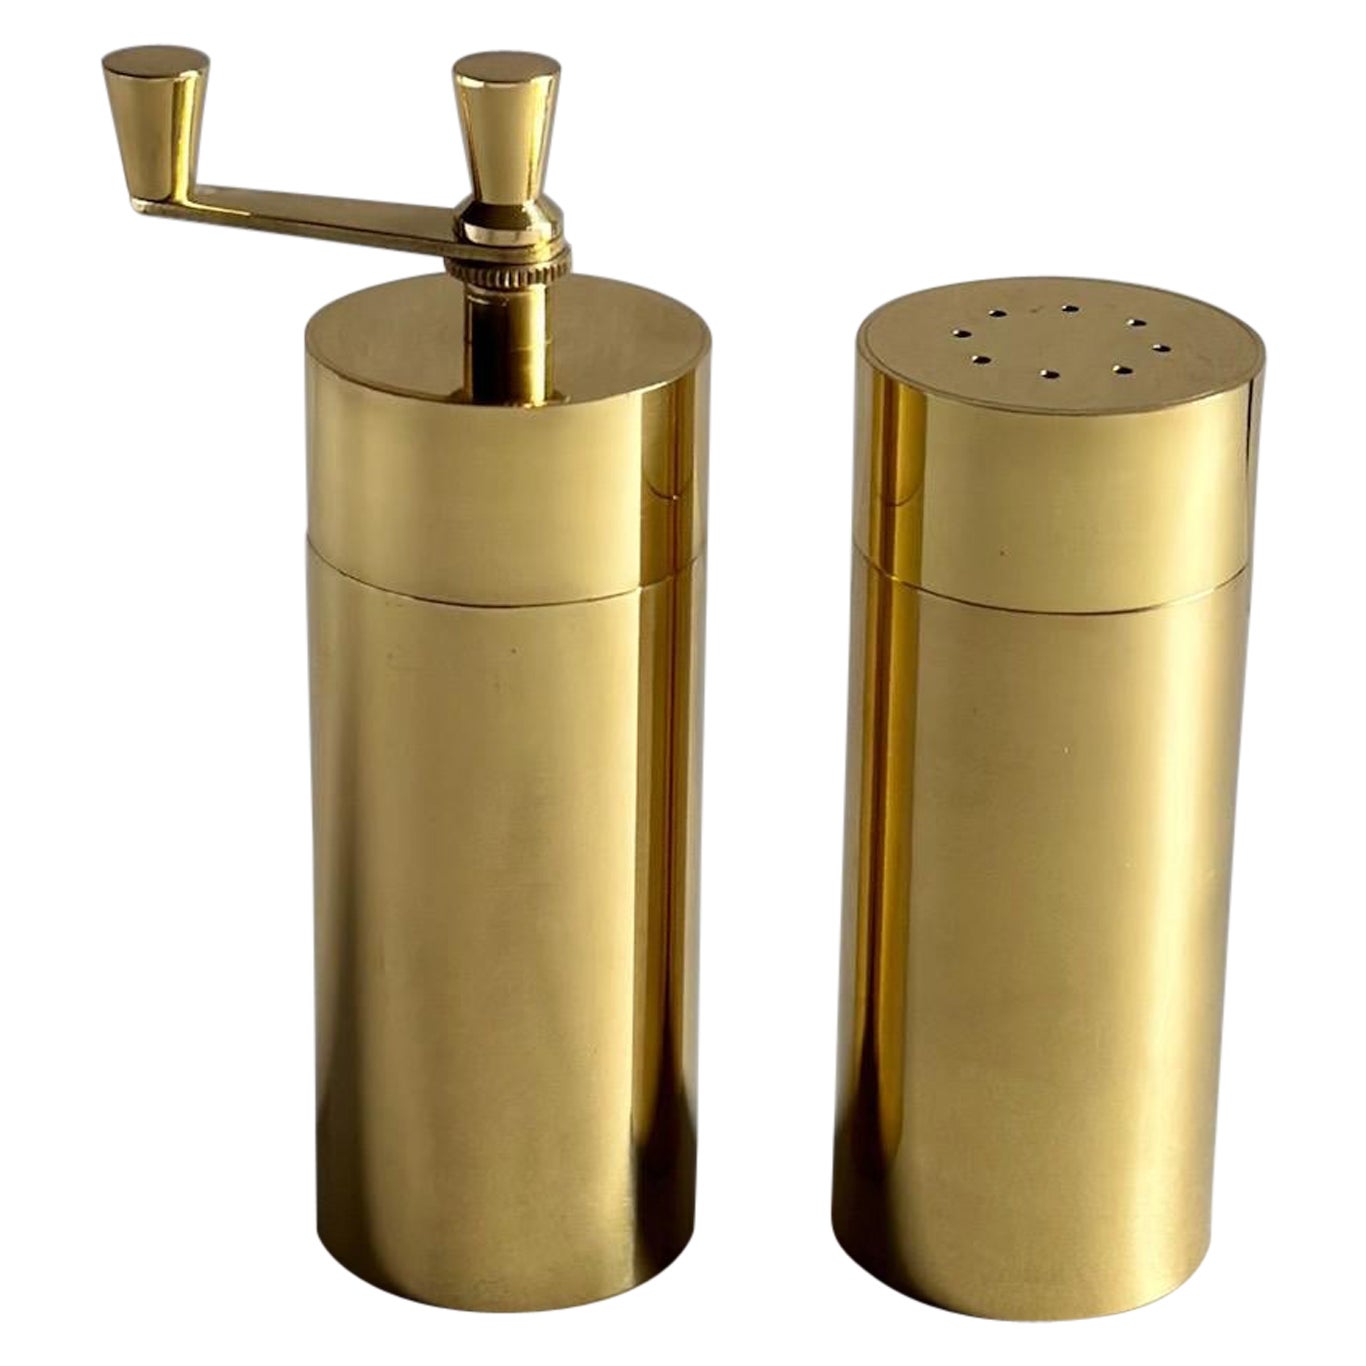 Modernist Lacquered Brass Pepper Mill and Salt Shaker, Italy, Original Box, 1960 For Sale